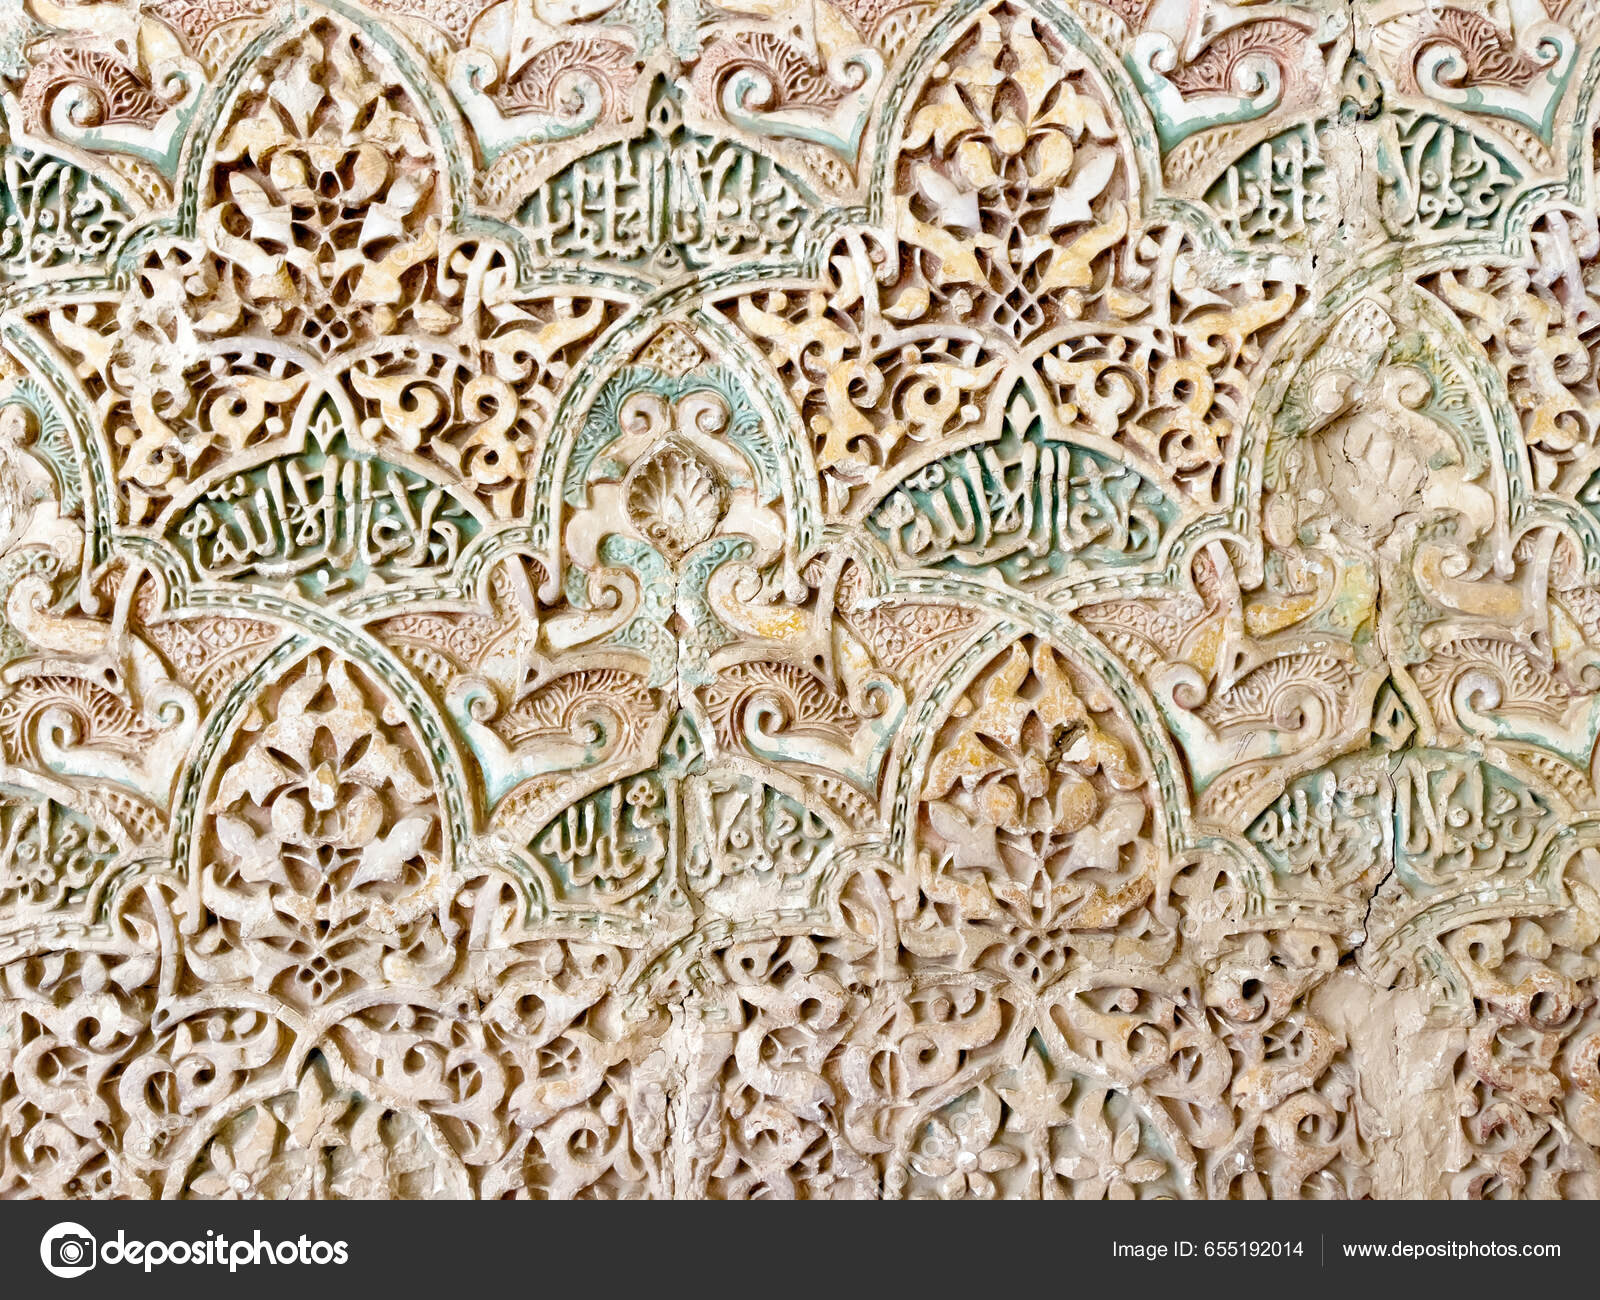 What Is Written On The Walls Of Alhambra?